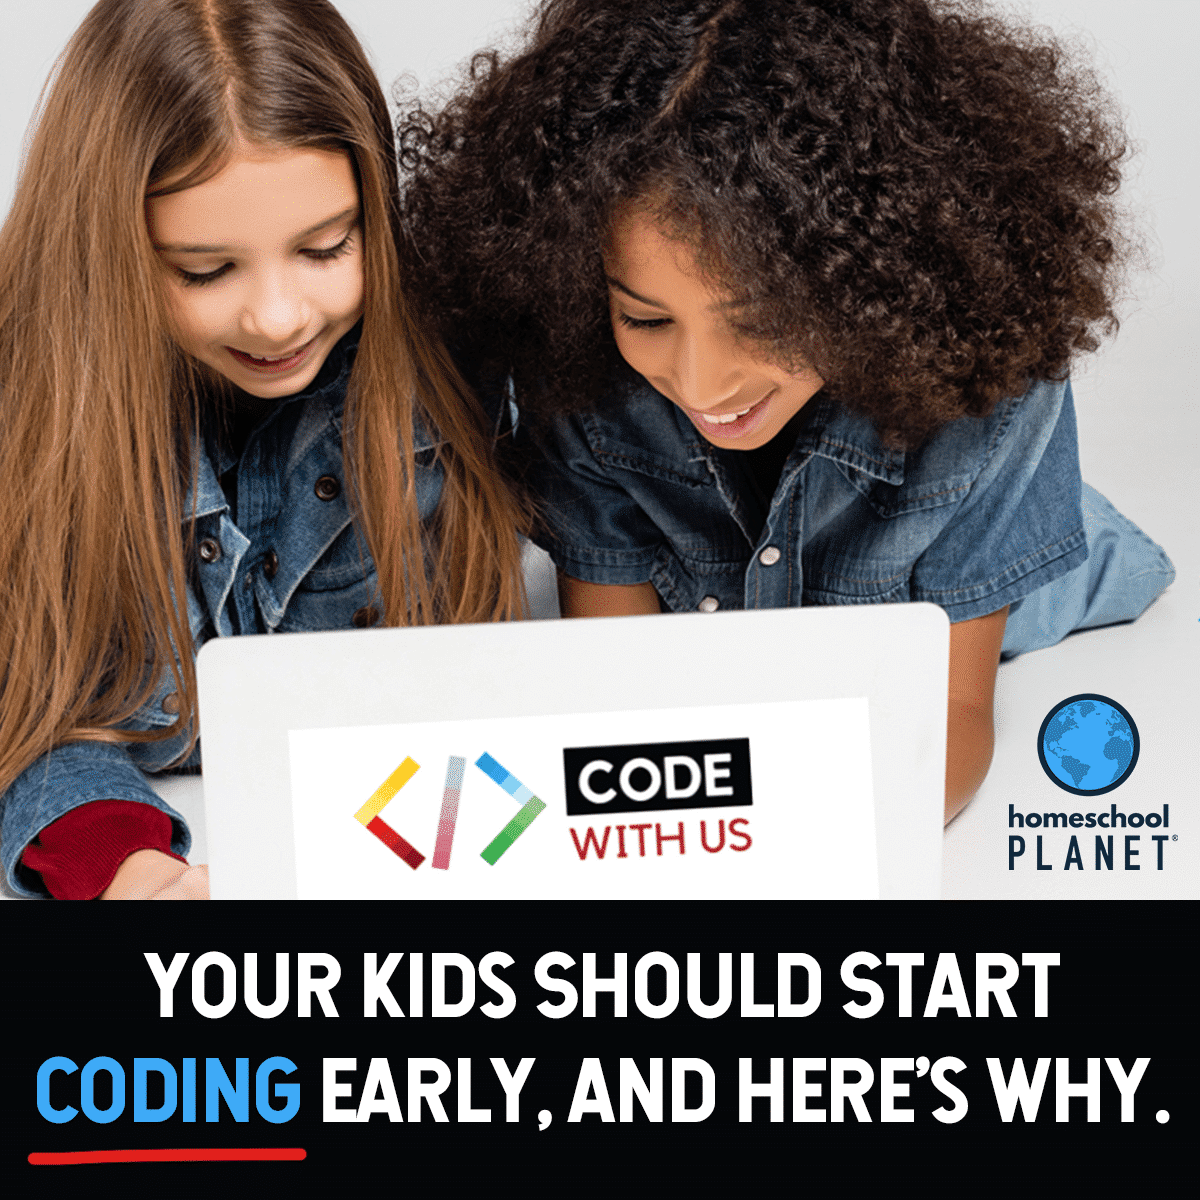 Your Kids Should Start Coding Early and Here’s Why